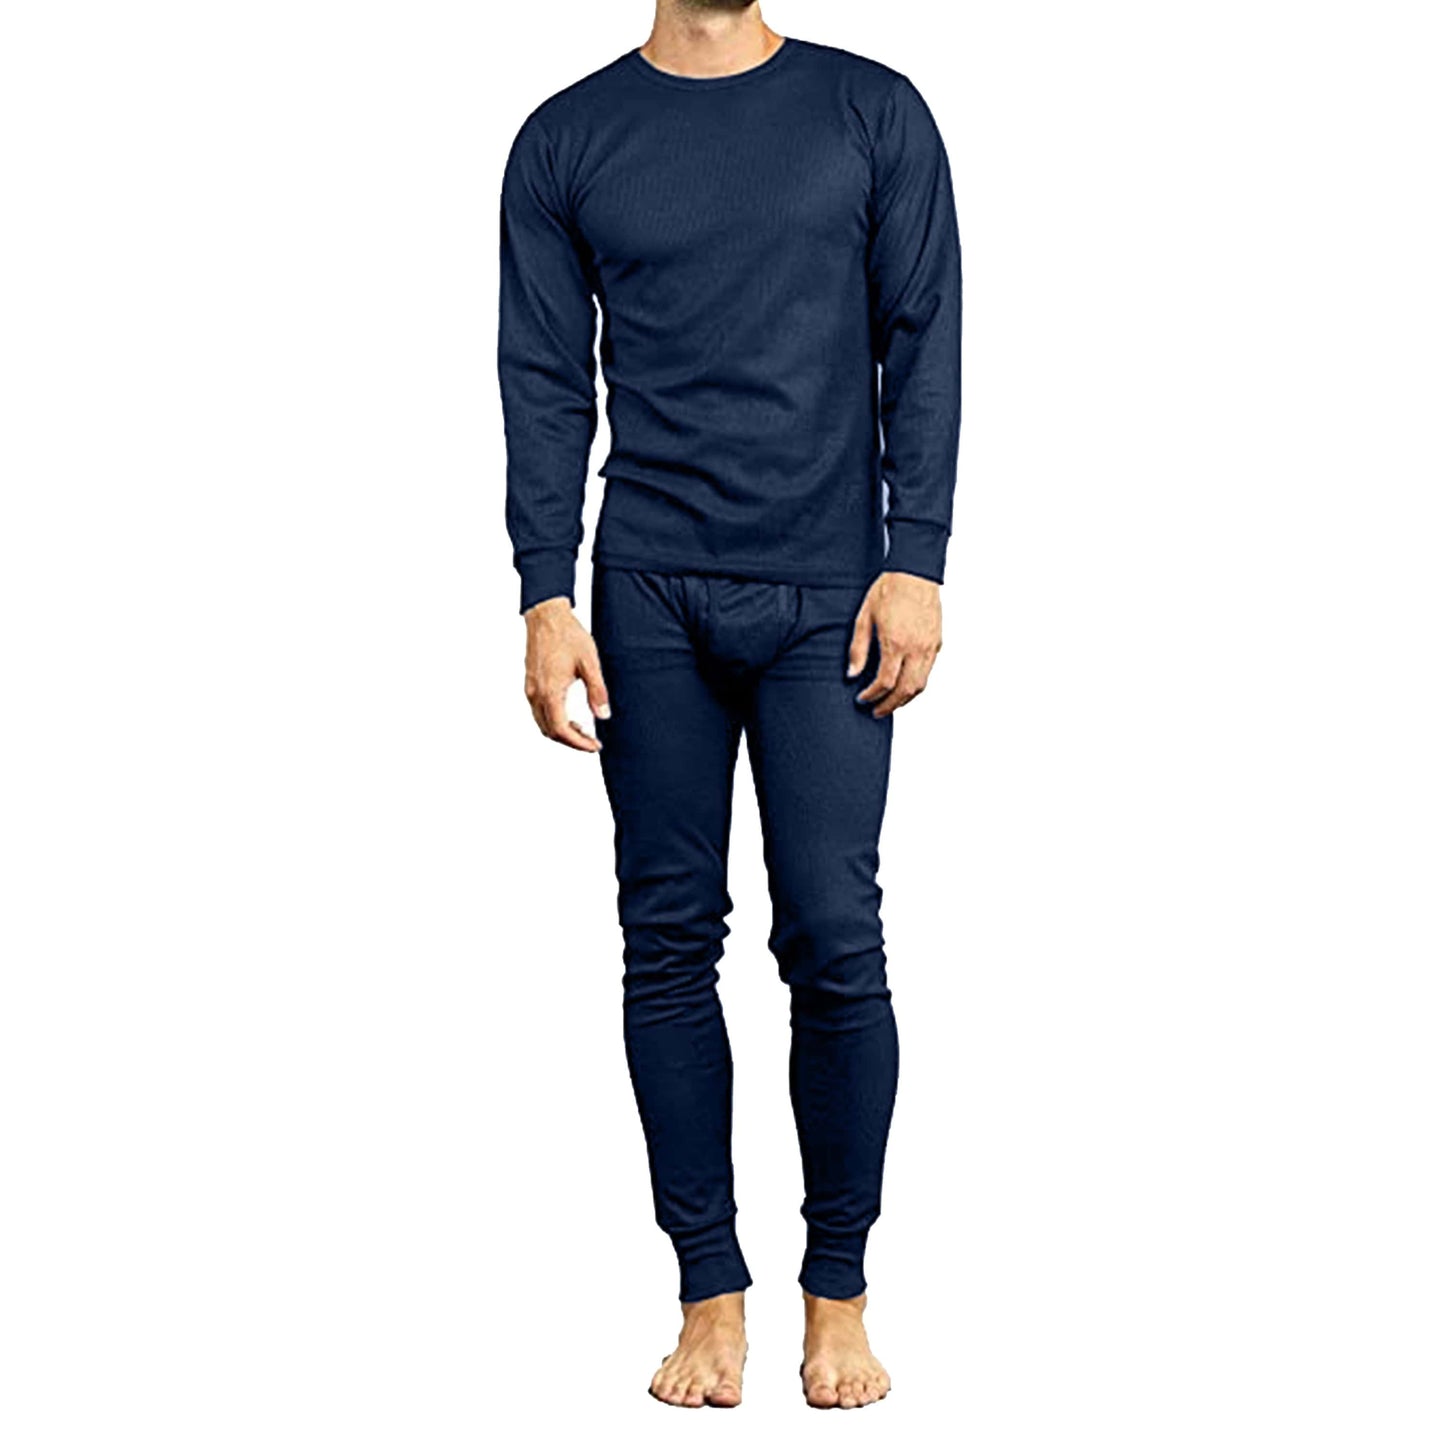 2-Piece Lightweight Thermal Set Of Both A Thermal Top And Bottom